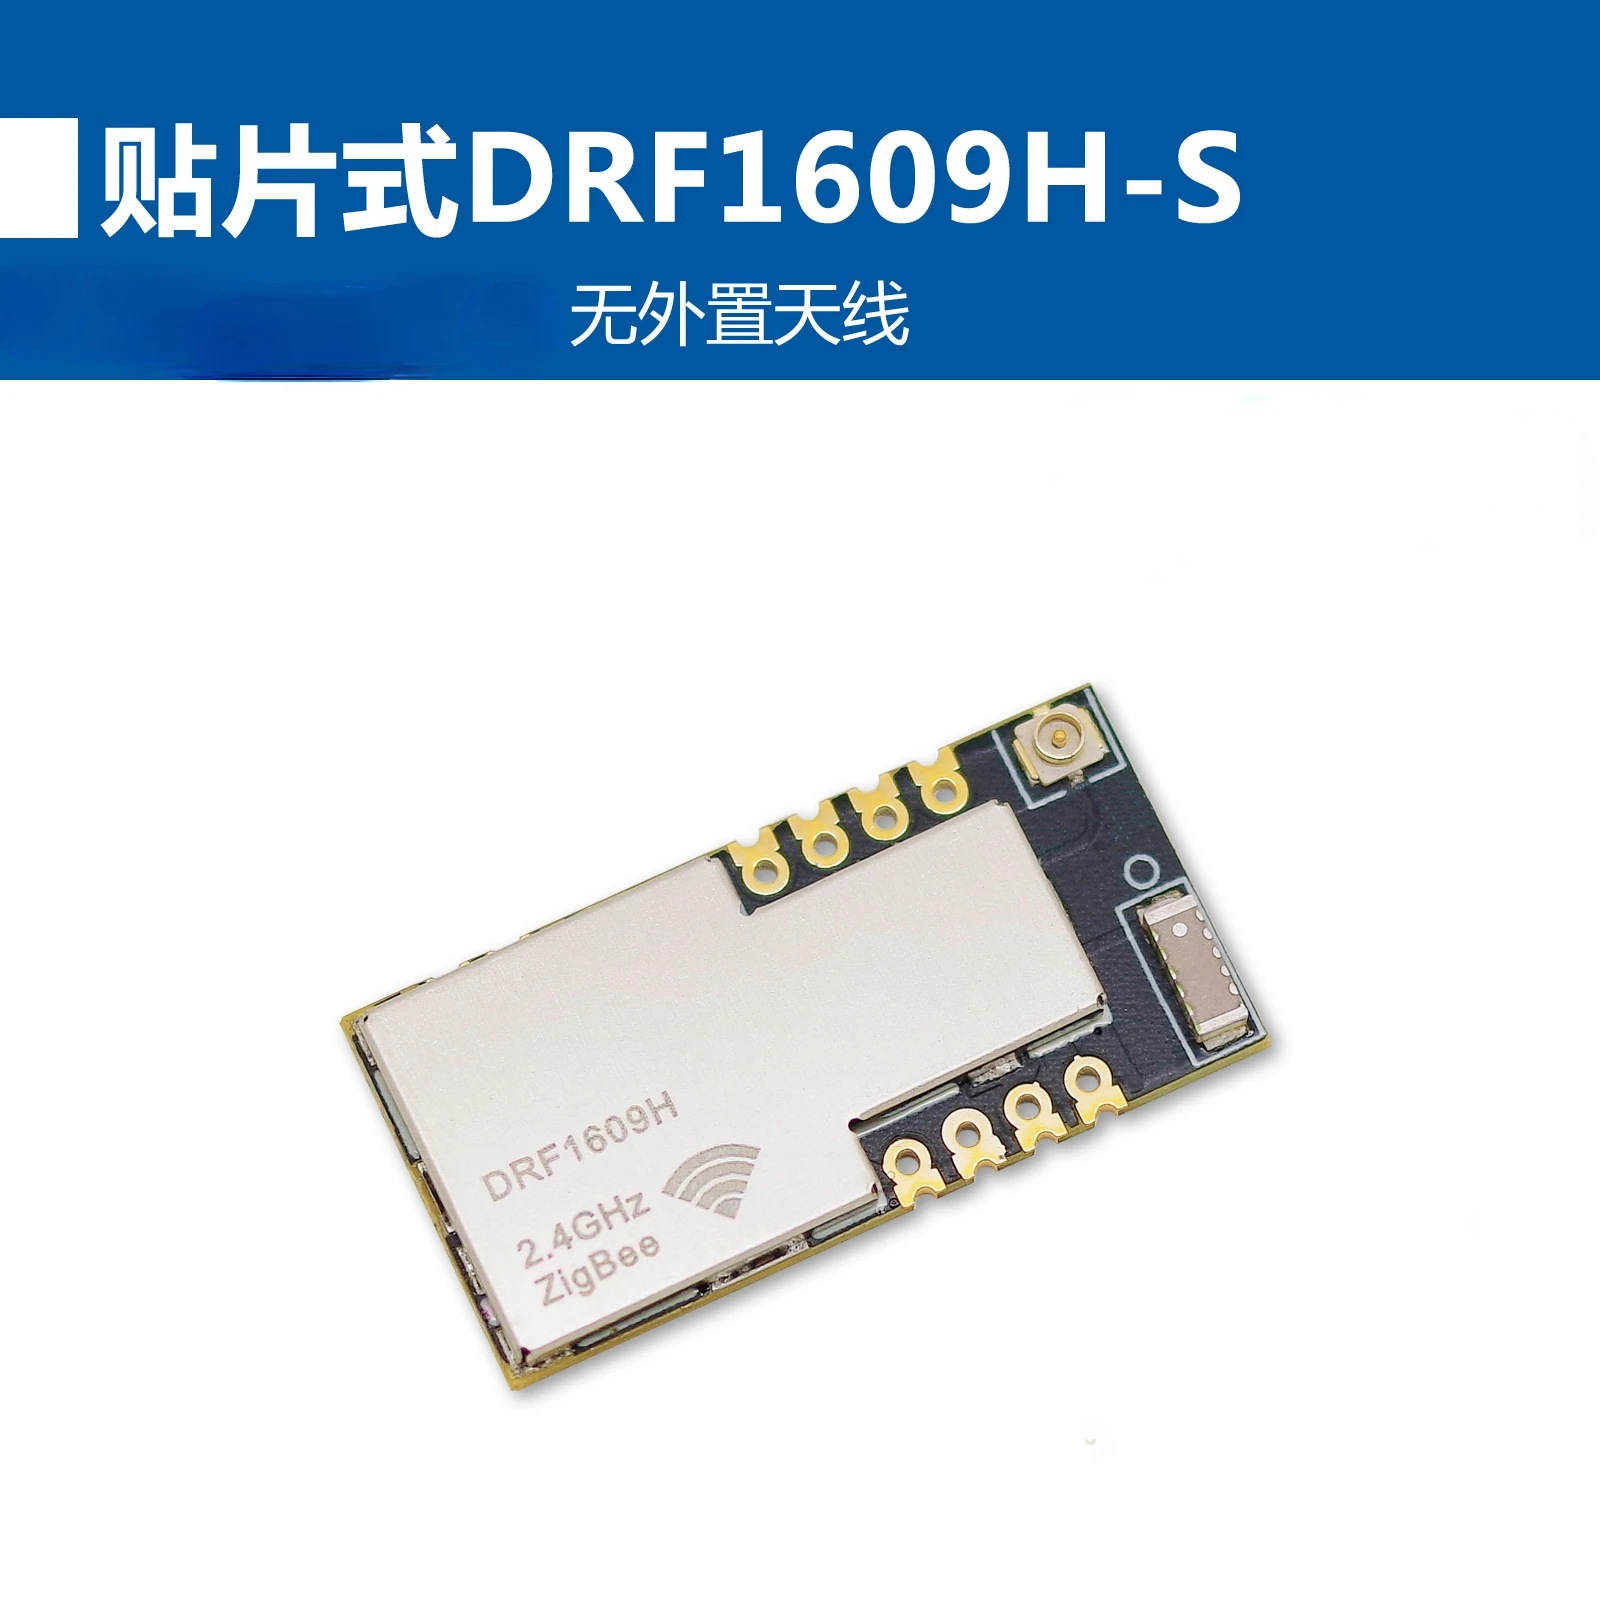 

UART serial port to ZigBee wireless module cc2630 over cc2530|drf1609h with PA1 6km transmission